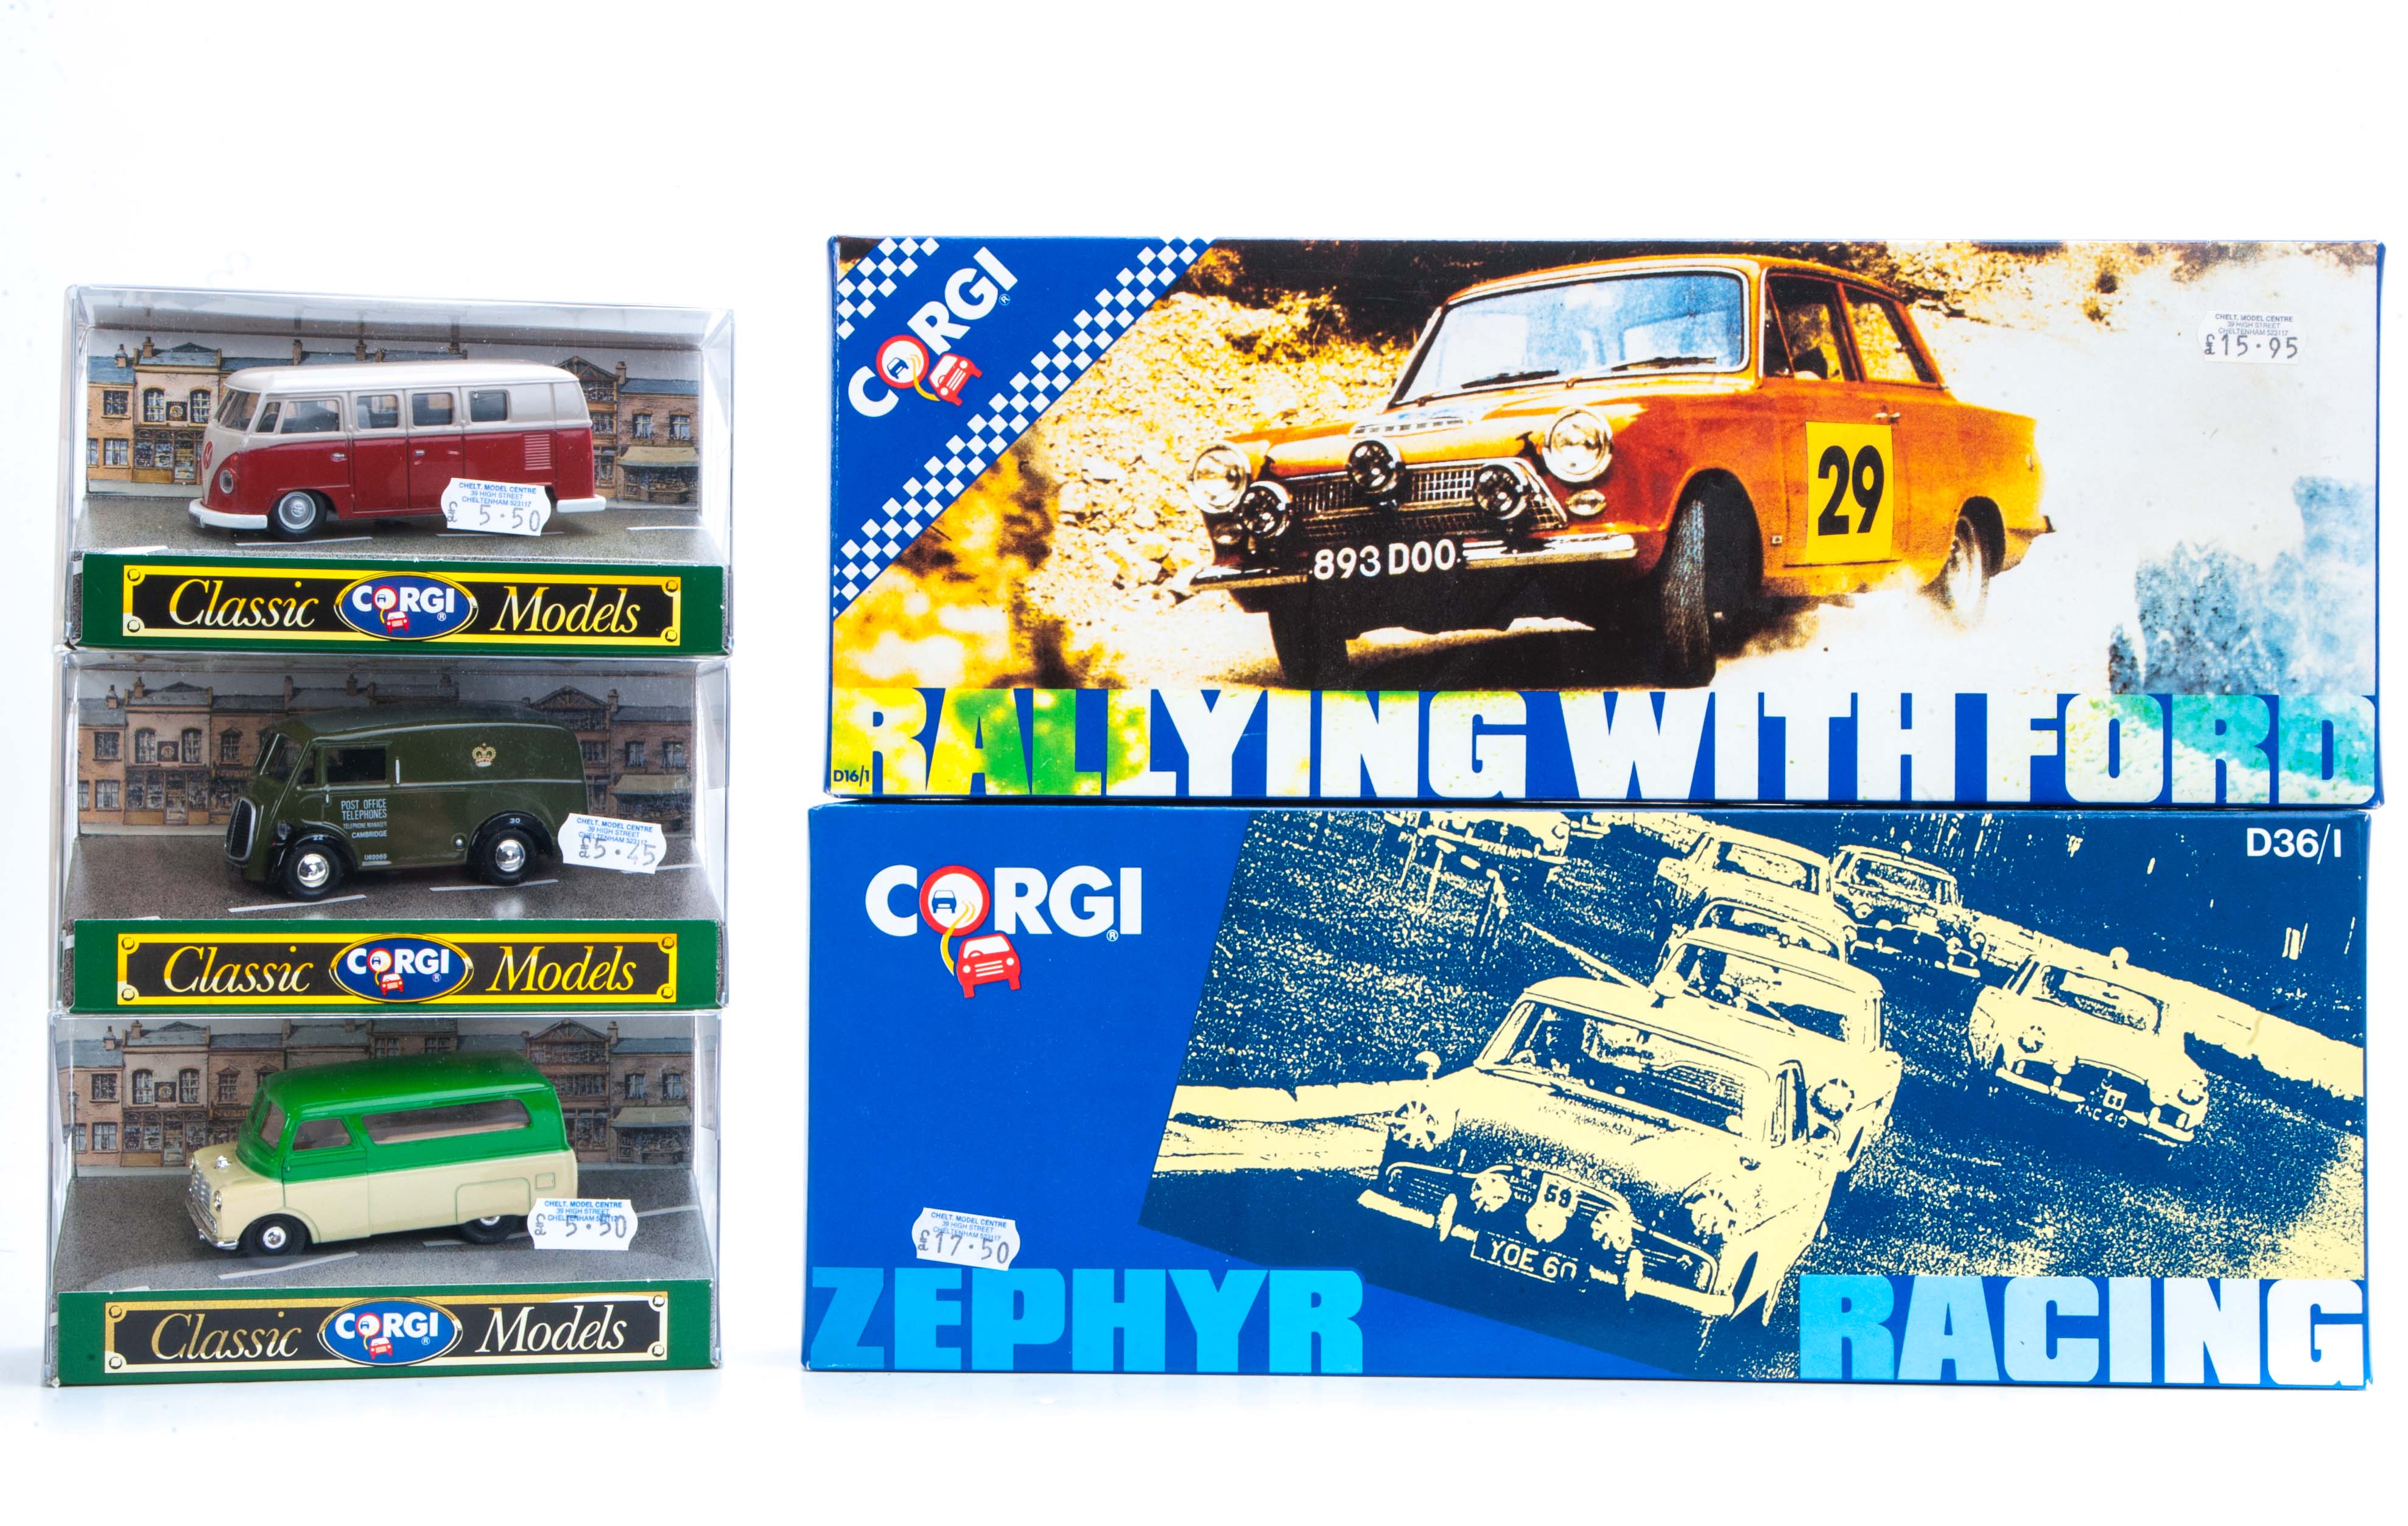 Corgi Toys, including D16/1 Rallying With Ford, D36/1 Zephyr Racing, D53/1 Four Rally Cars, green